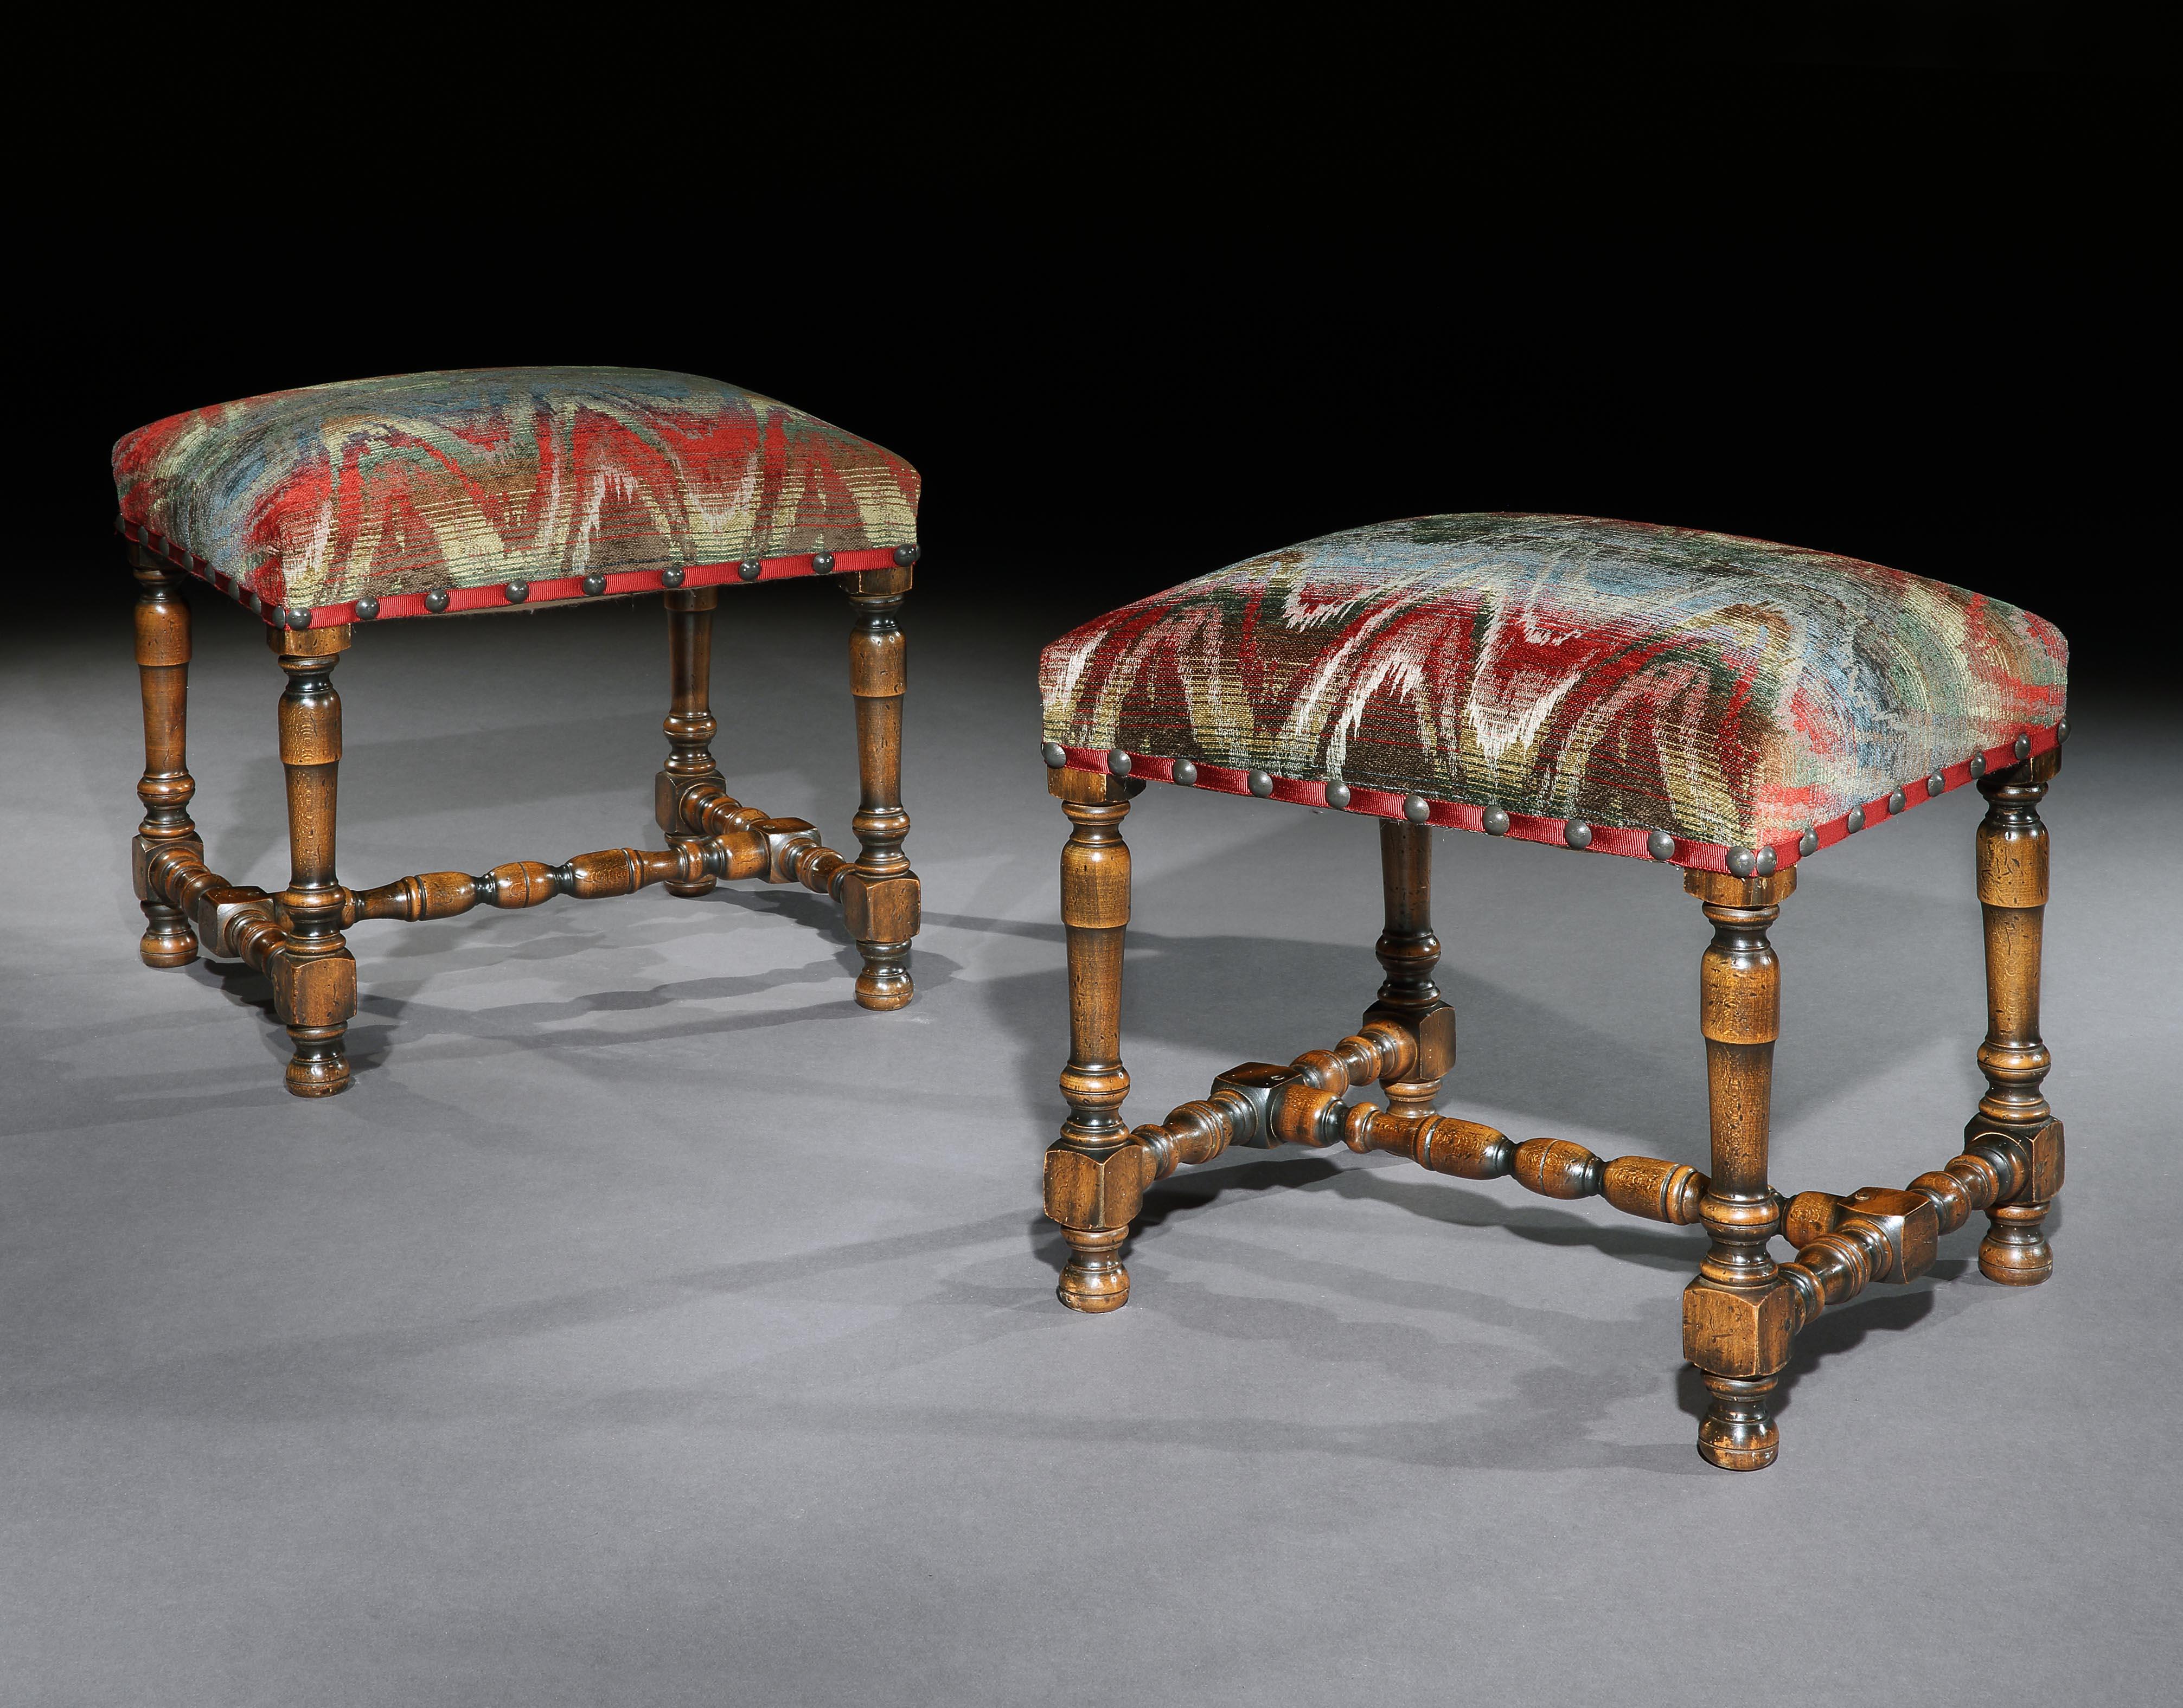 A pair of antiquarian, Baroque-style, walnut, stools upholstered in bargello or flame stitch

In the late 19th-early 20th century the revival of the Baroque-style in country house interiors and furnishing led to exclusive central, London firms